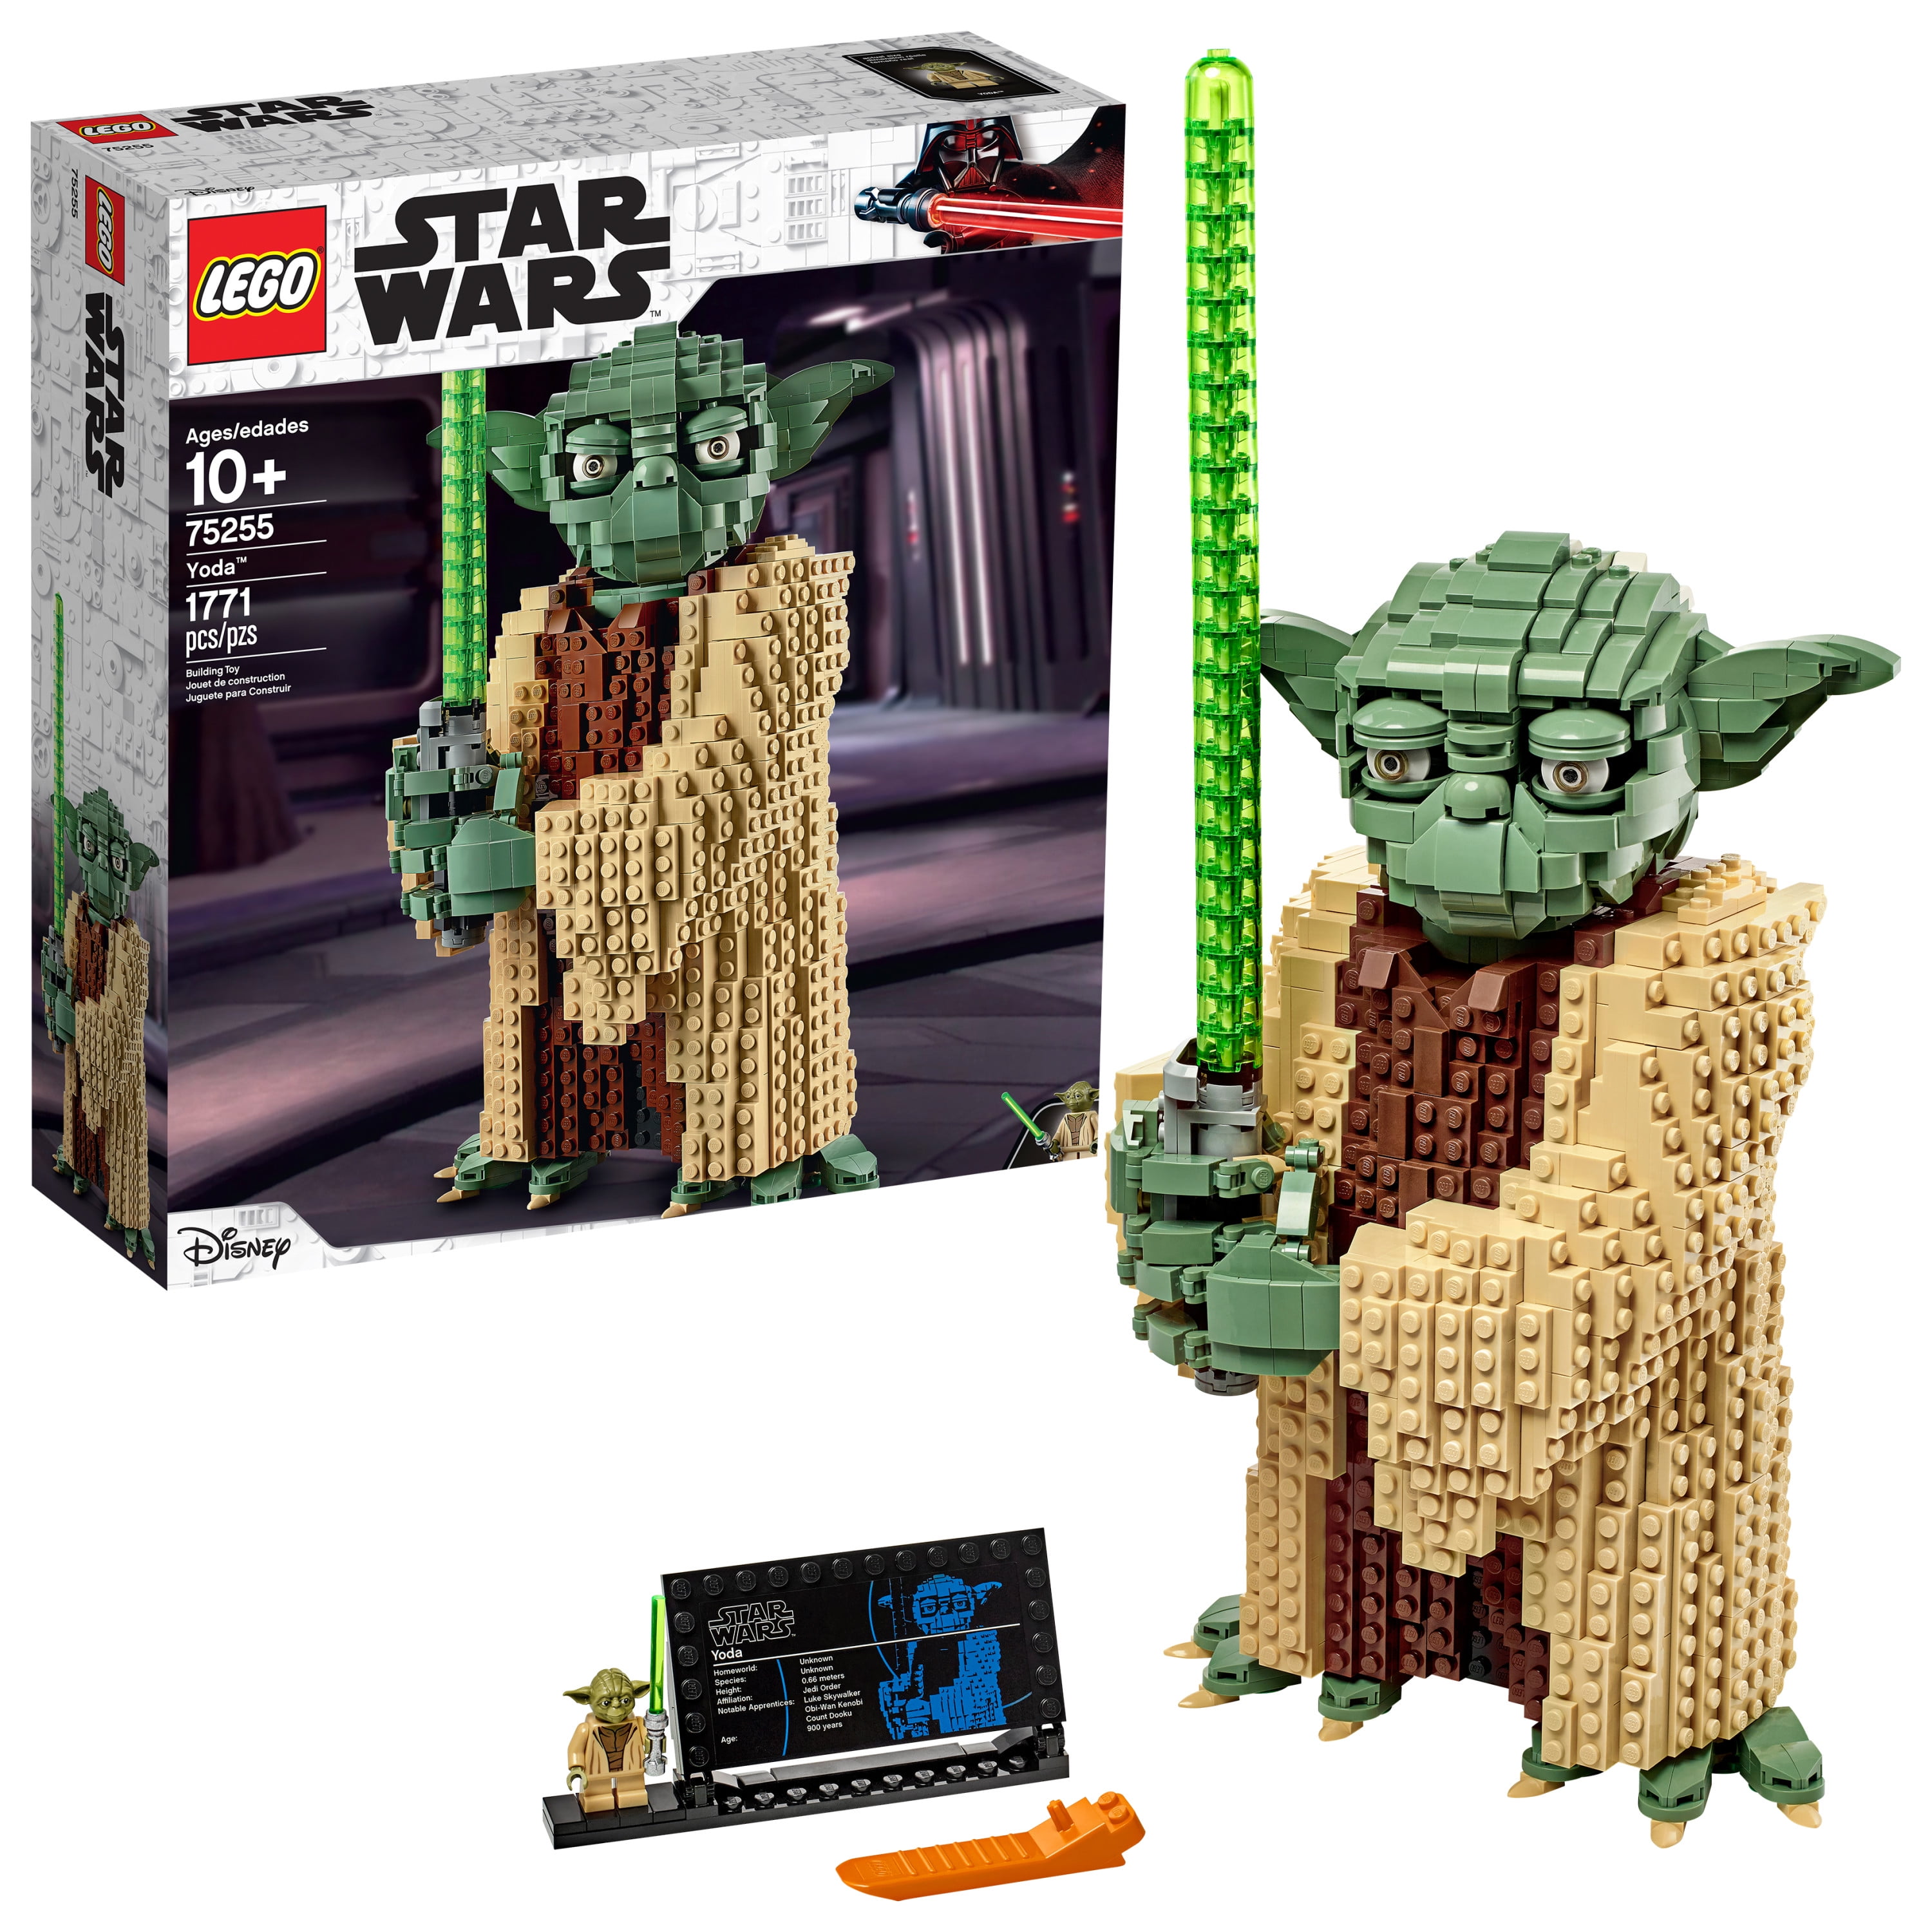 LEGO Star Wars: Attack of the Clones Yoda 75255 Collectible Model and Building Toy (1,771 Pieces)